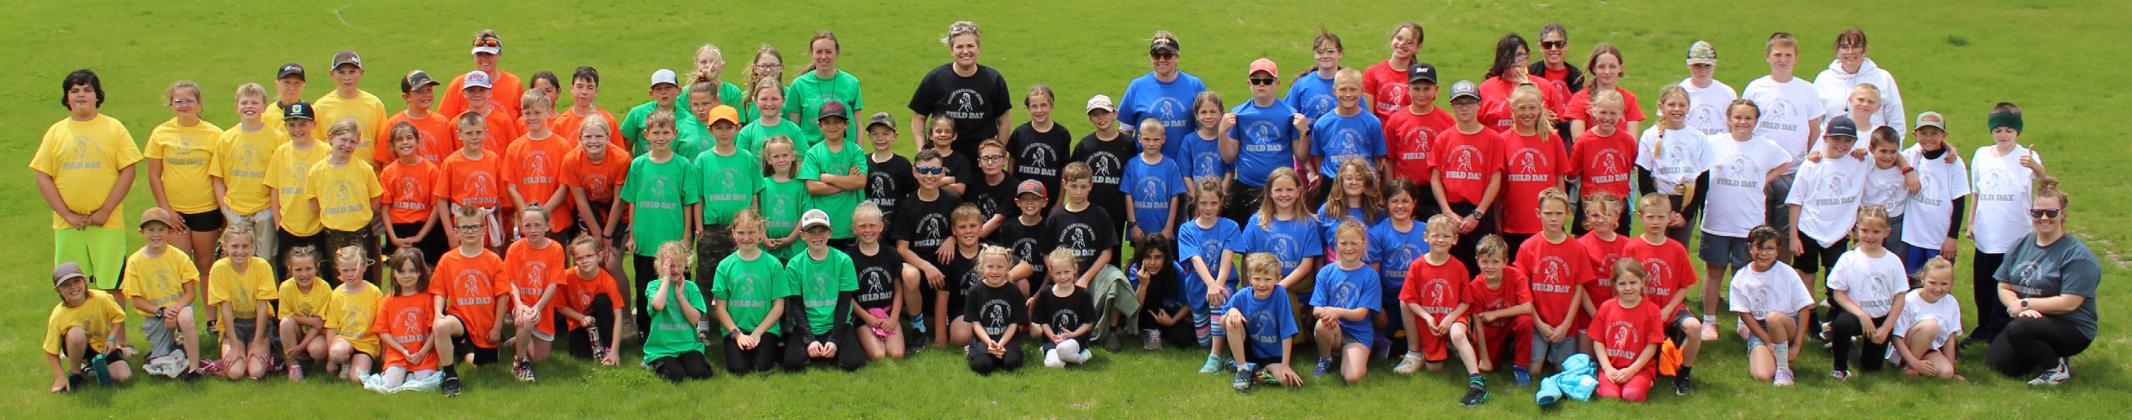 The Mullen Elementary Field Day was held last Tuesday, May 7. Pictured above in their team colors (which online subscribers can see) are students in grades K-6 who took part in the day.